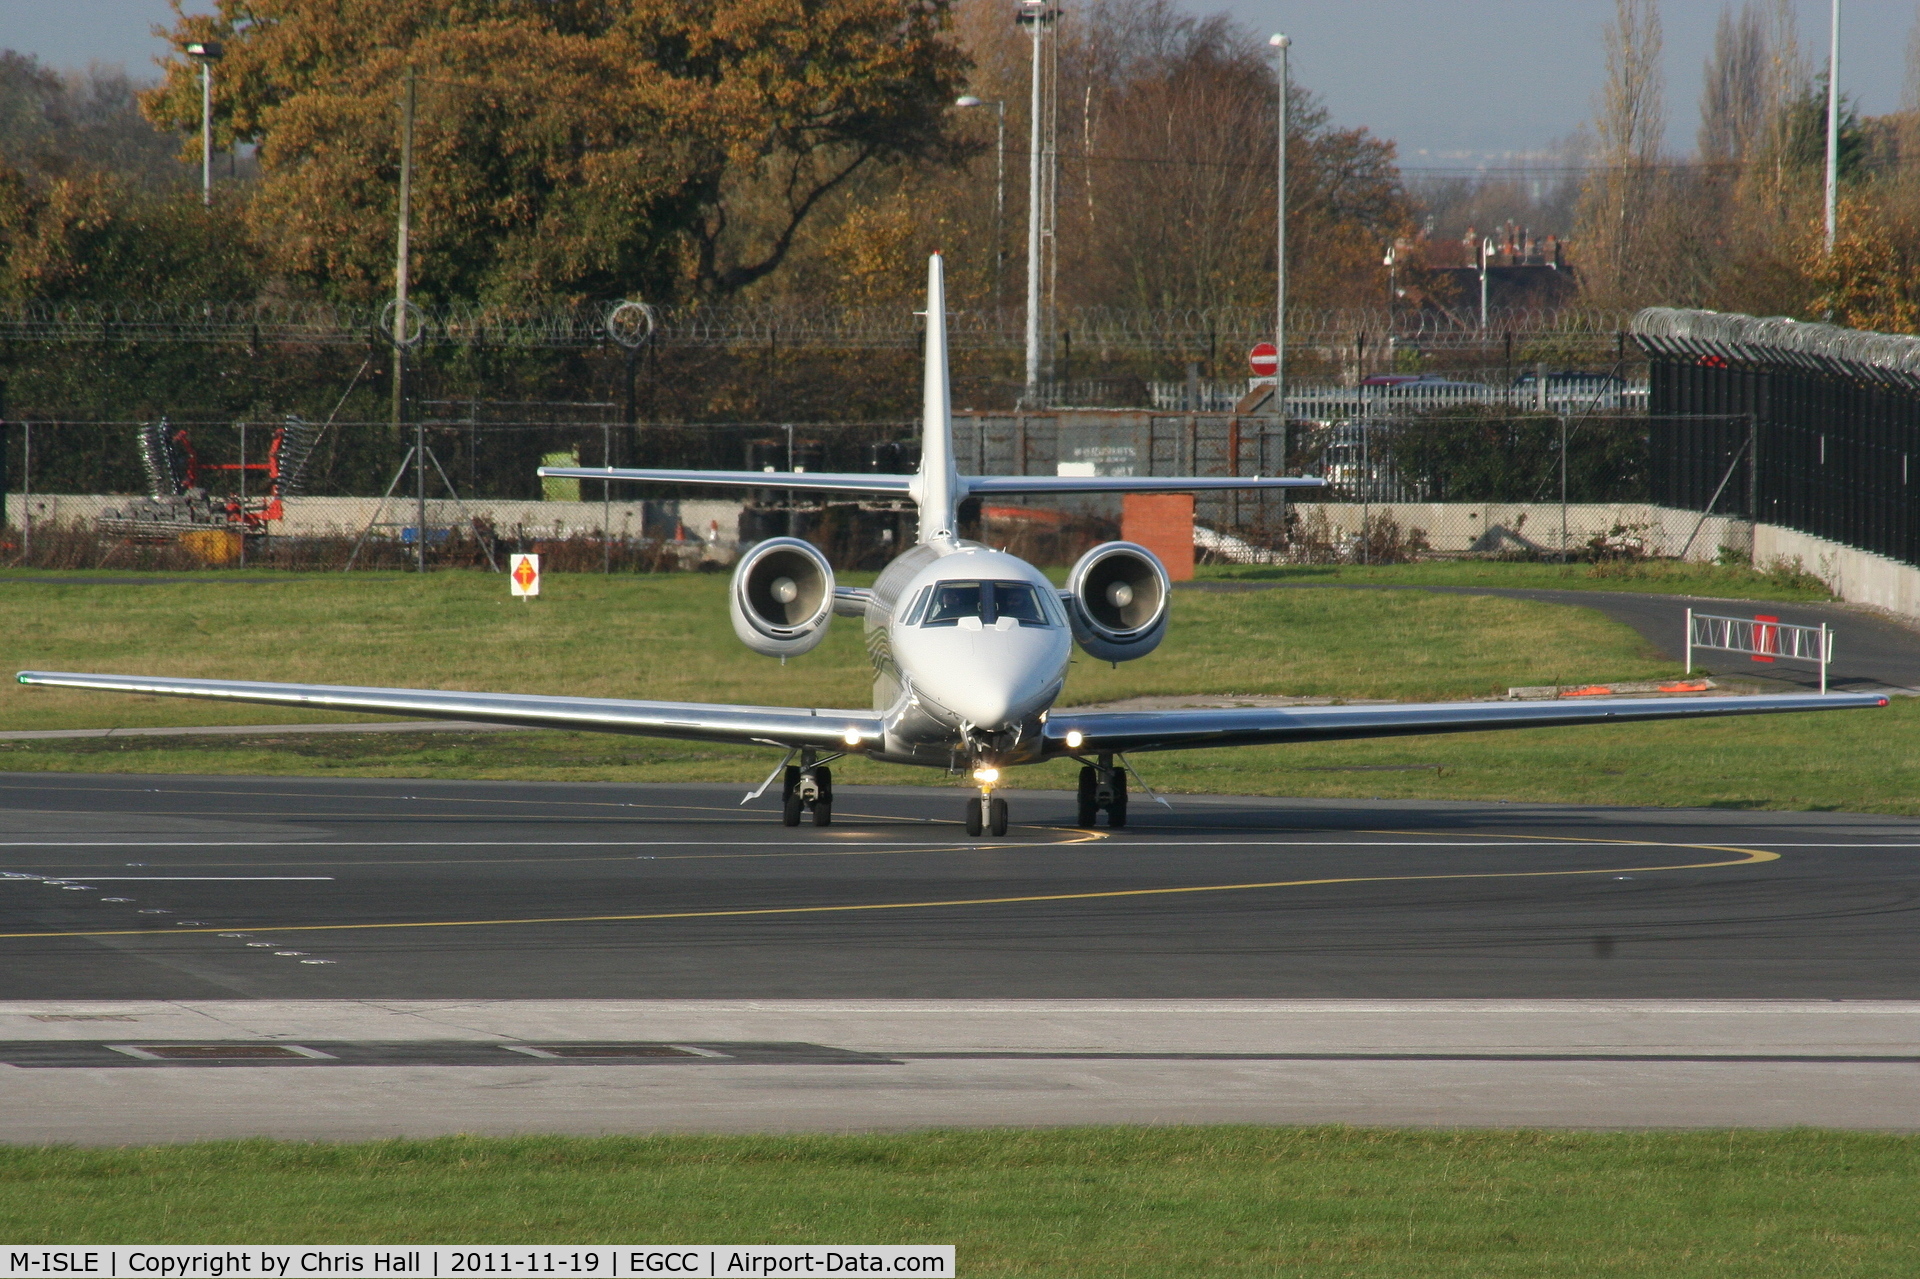 M-ISLE, 2009 Cessna 680 Citation Sovereign C/N 680-0265, Bakewell Industries